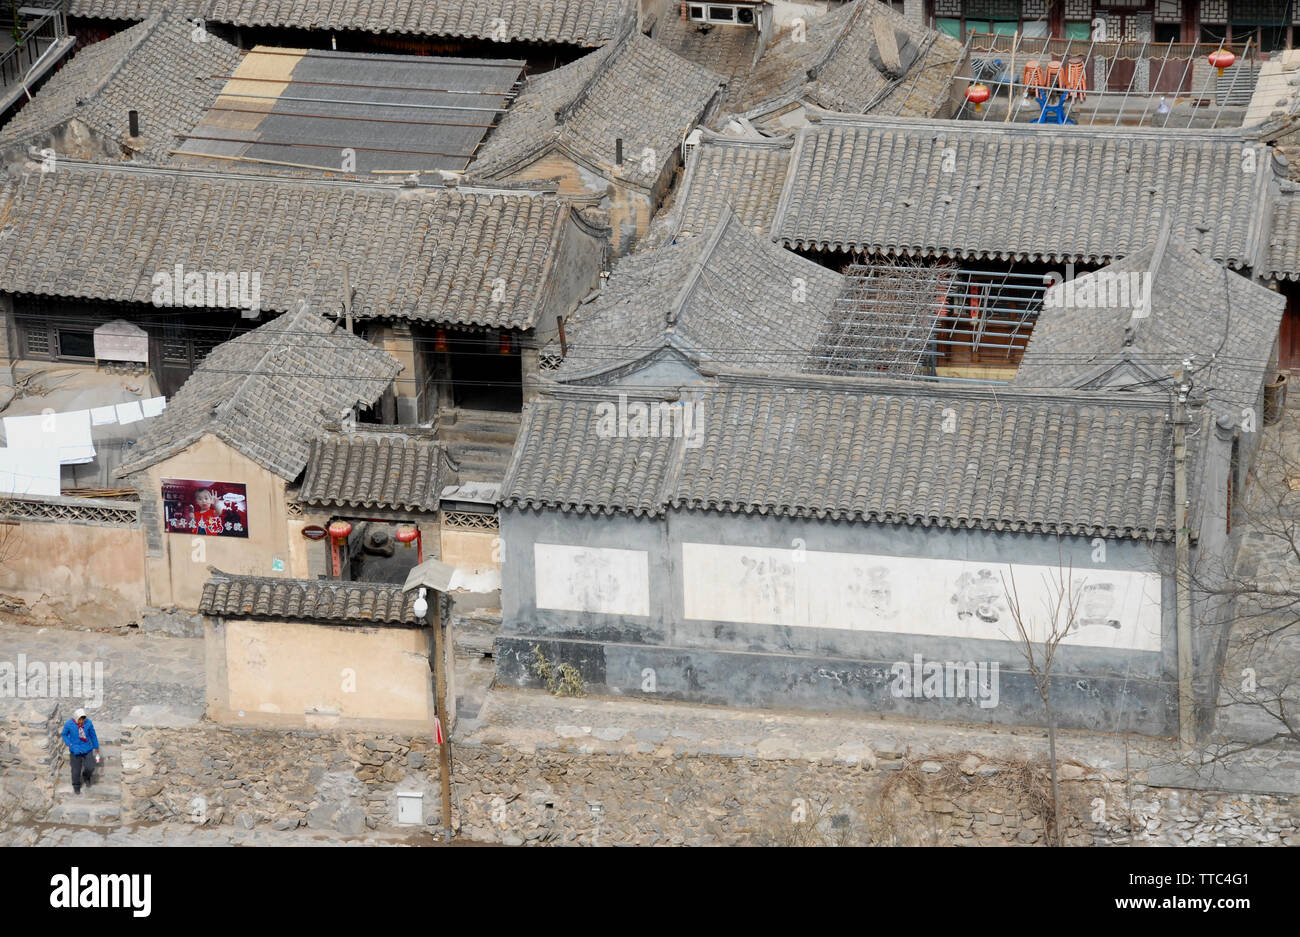 Cuandixia (Chuandixia) is an ancient town/village near Beijing, China. Chuandixia has Ming and Qing Dynasty Chinese architecture with courtyard homes. Stock Photo